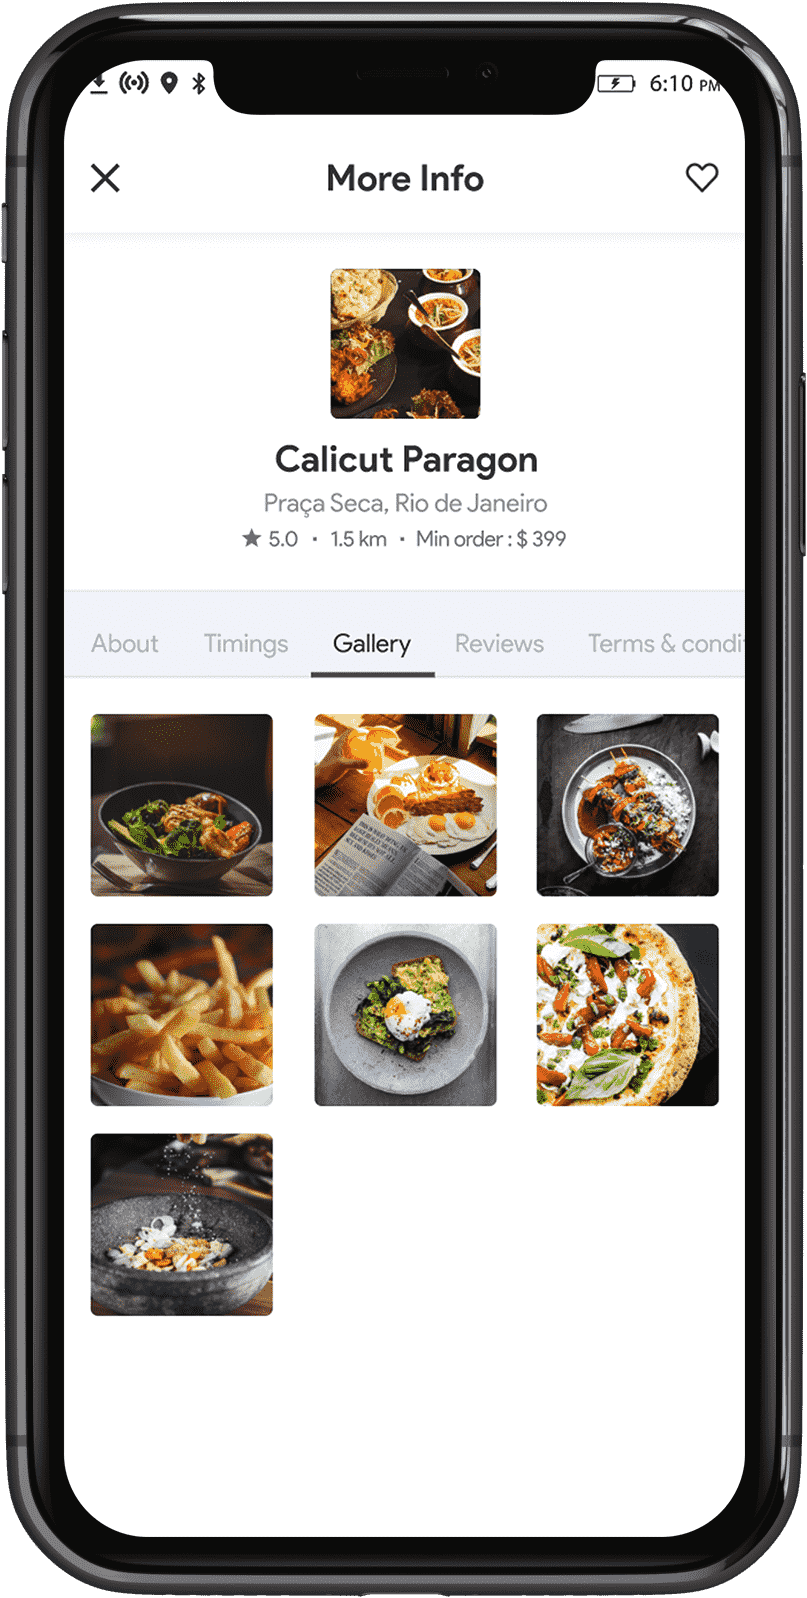 resturant-gallery-section-in-food-delivery-customer-app